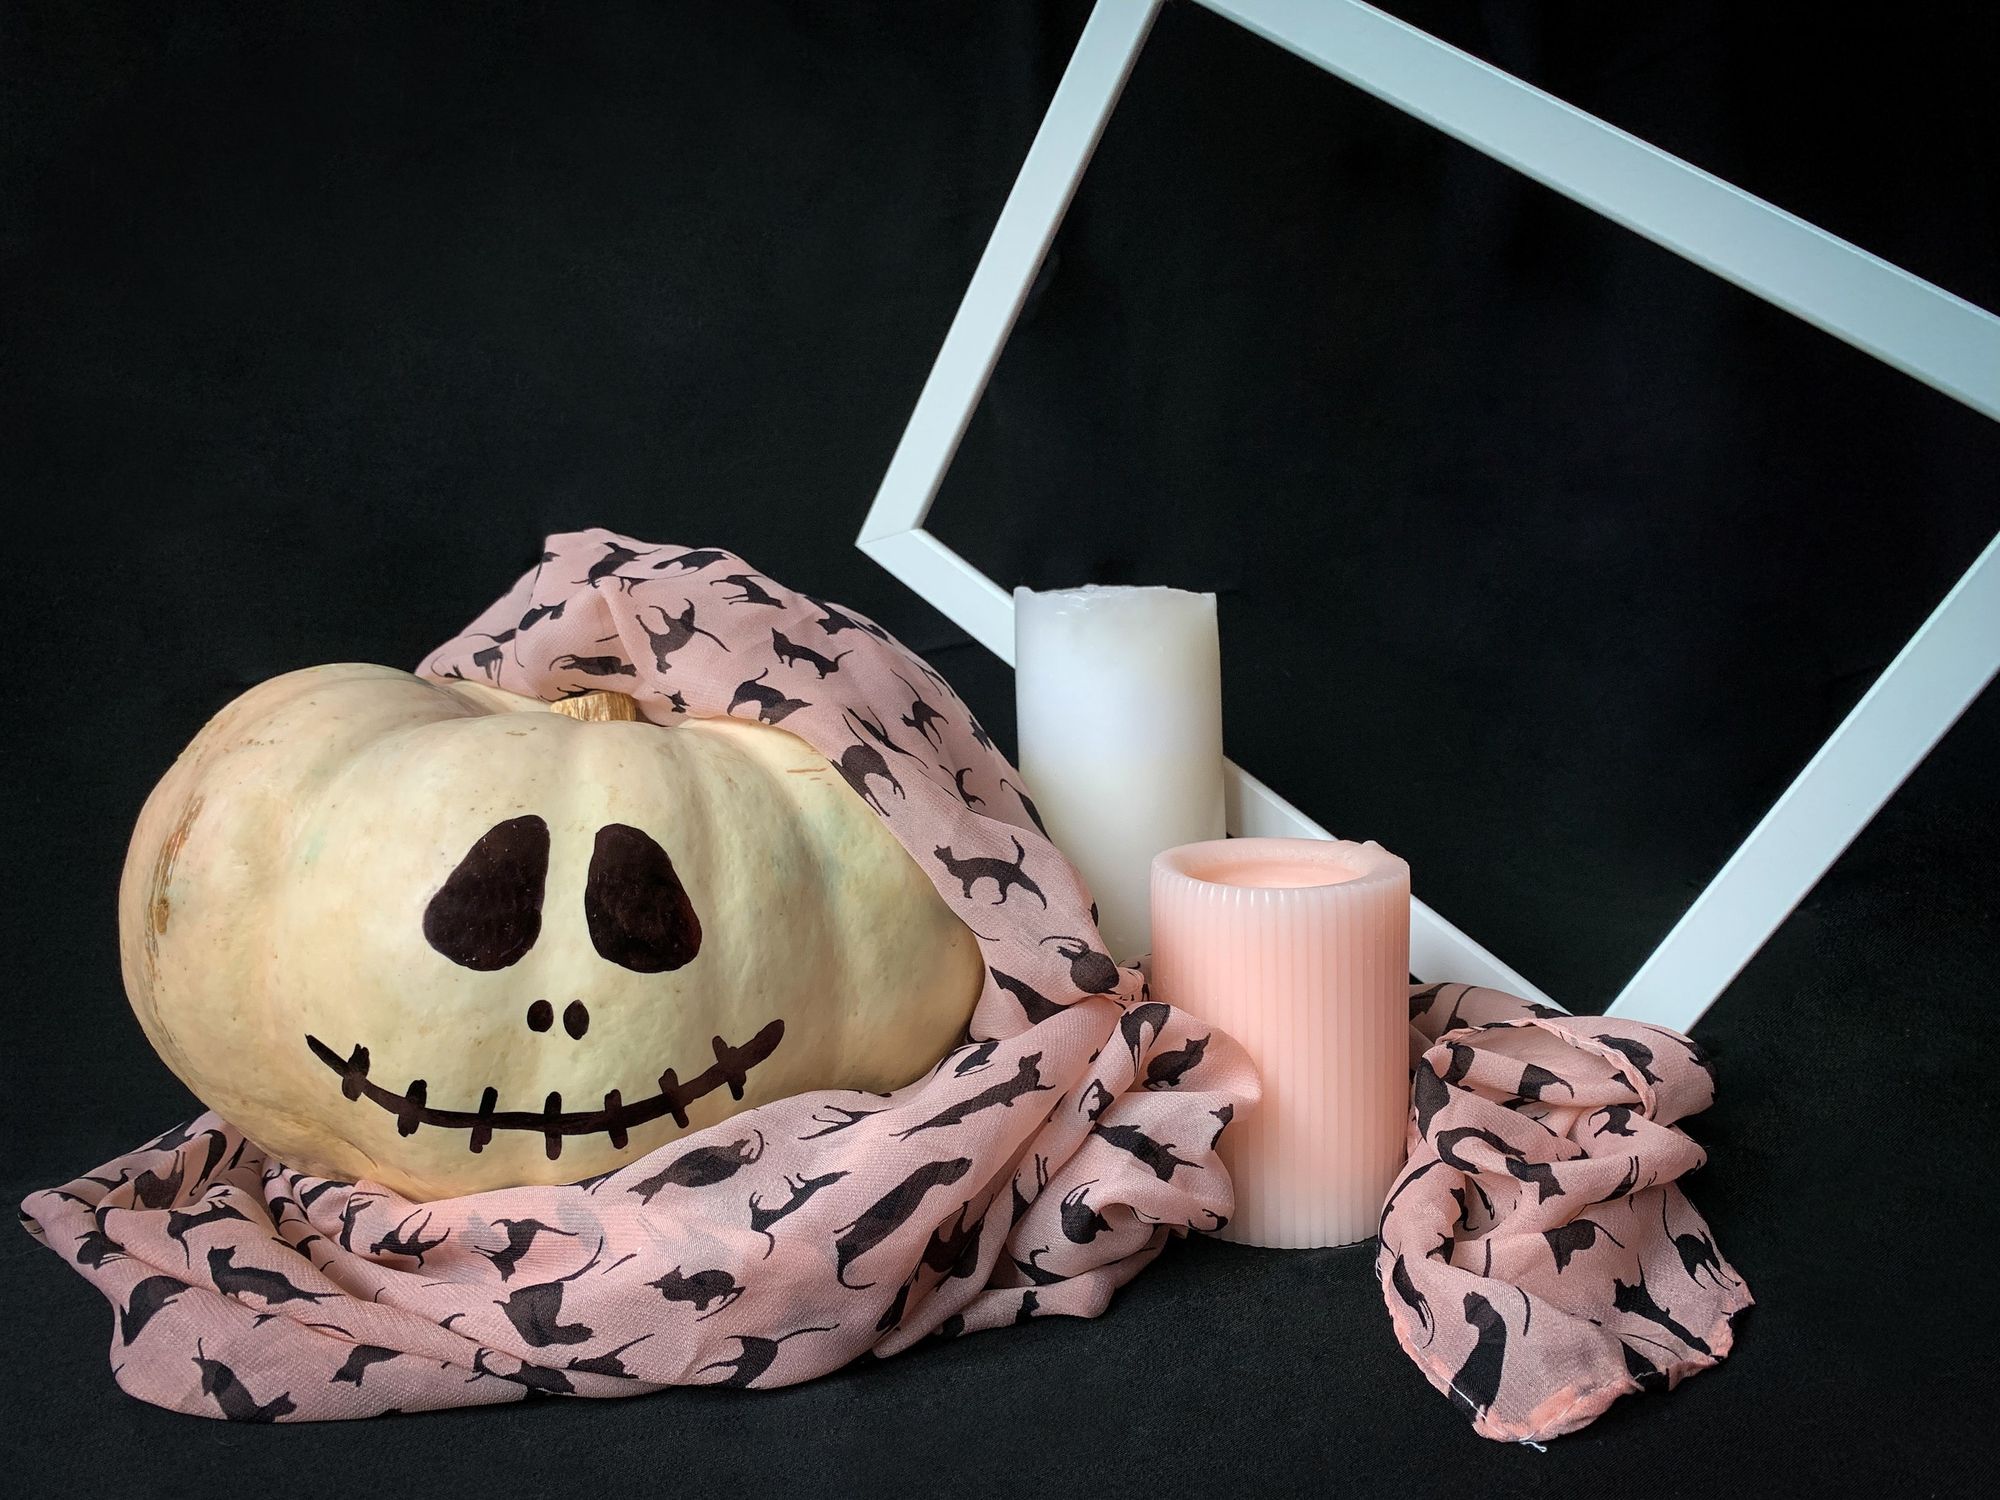 Pastel Goth Witch Pattern Pillows